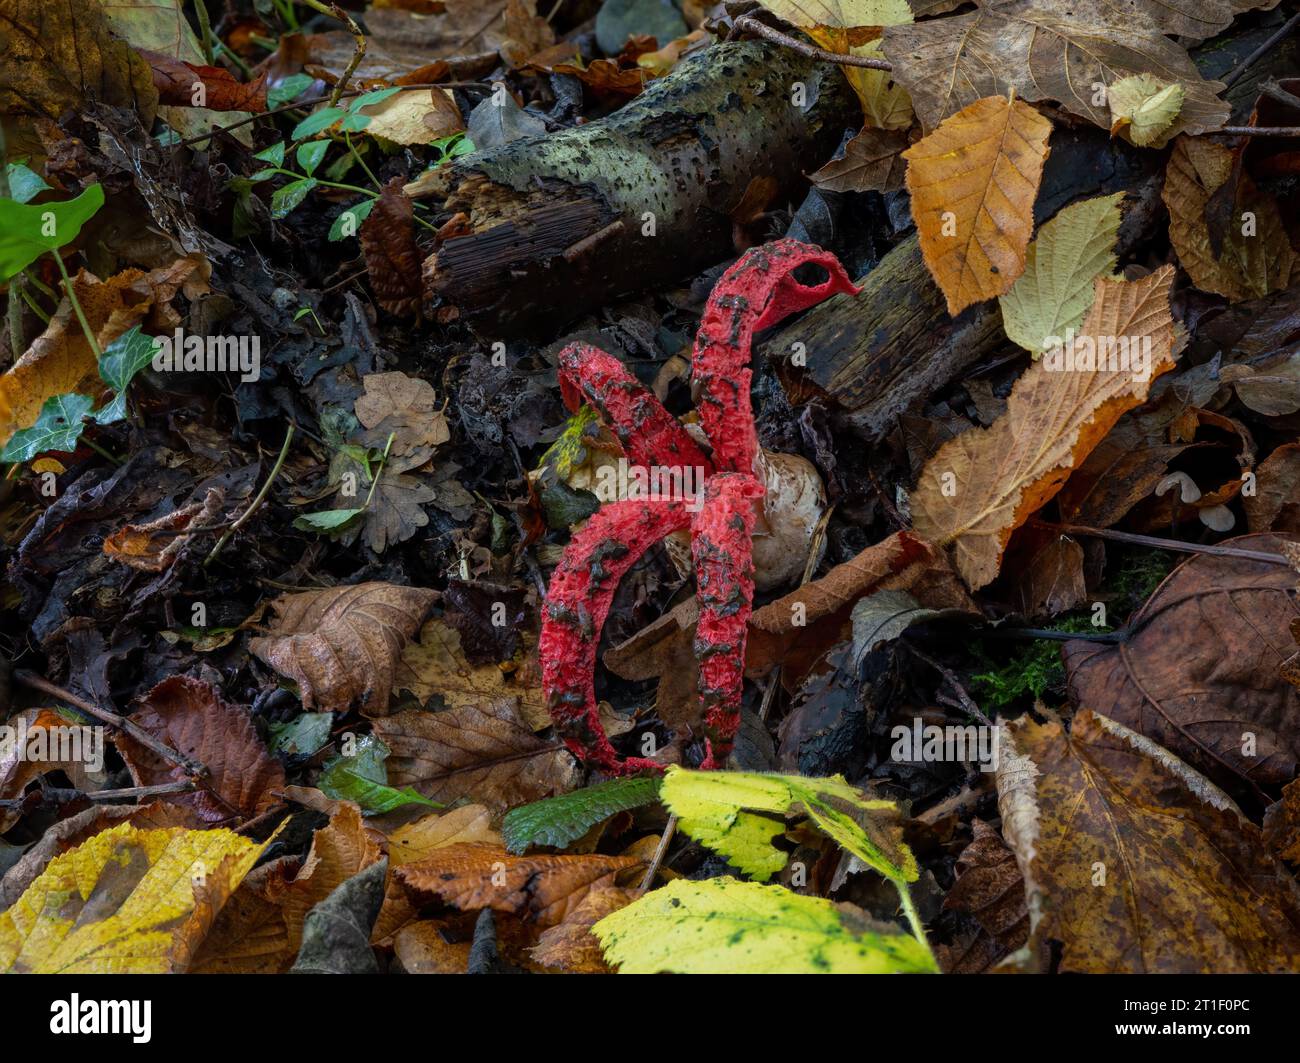 Octopus Stinkhorn or Devil's Fingers (Clathus archeri) with brown spore carrying gleba on tentacles, waiting for flies to carry spores from the gleba Stock Photo